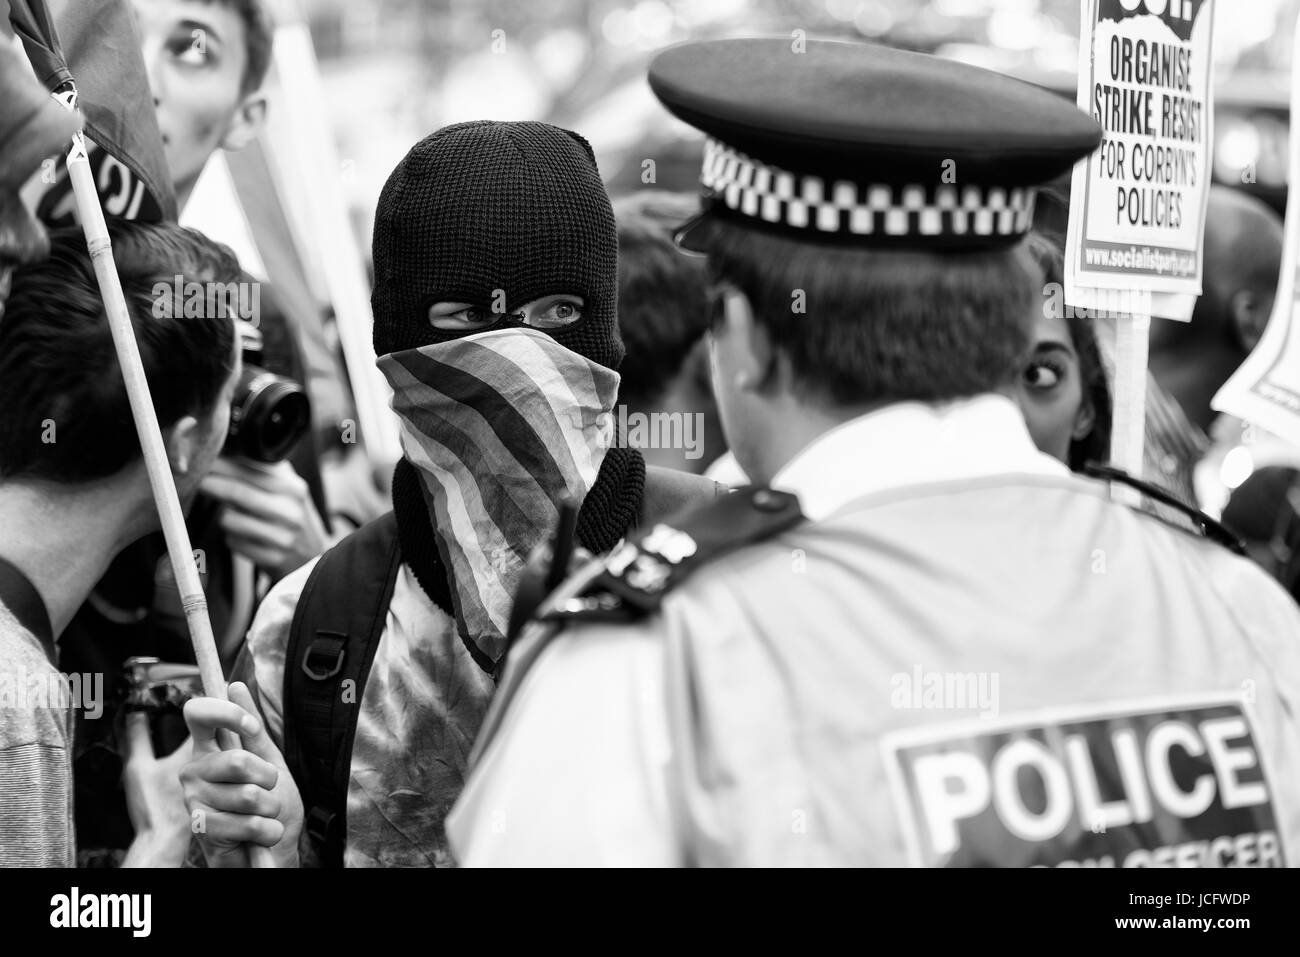 Demonstrators in Whitehall outside Downing Street in confrontational mood. Black & white. Monochrome Stock Photo